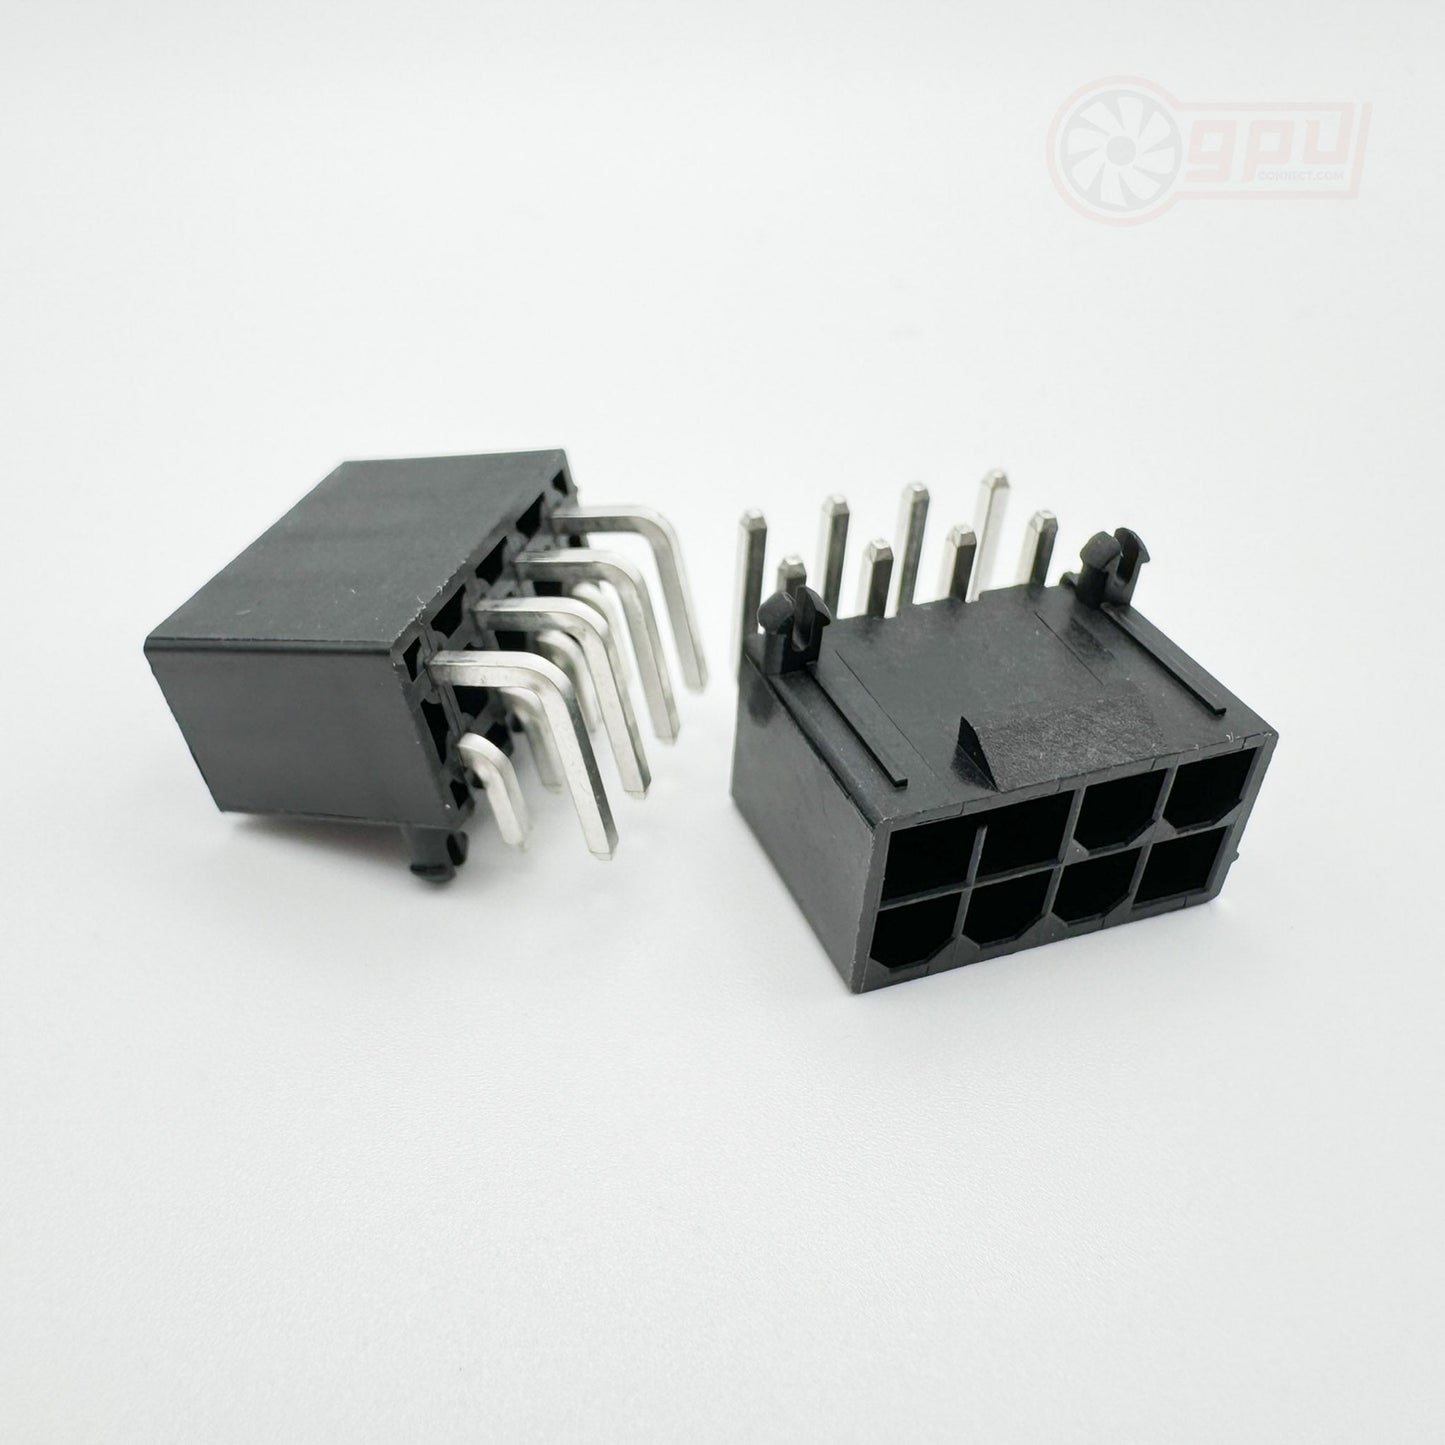 8-Pin PCI-Express PCIE Replacement Power Connector for Graphics Cards GPU - GPUCONNECT.COM